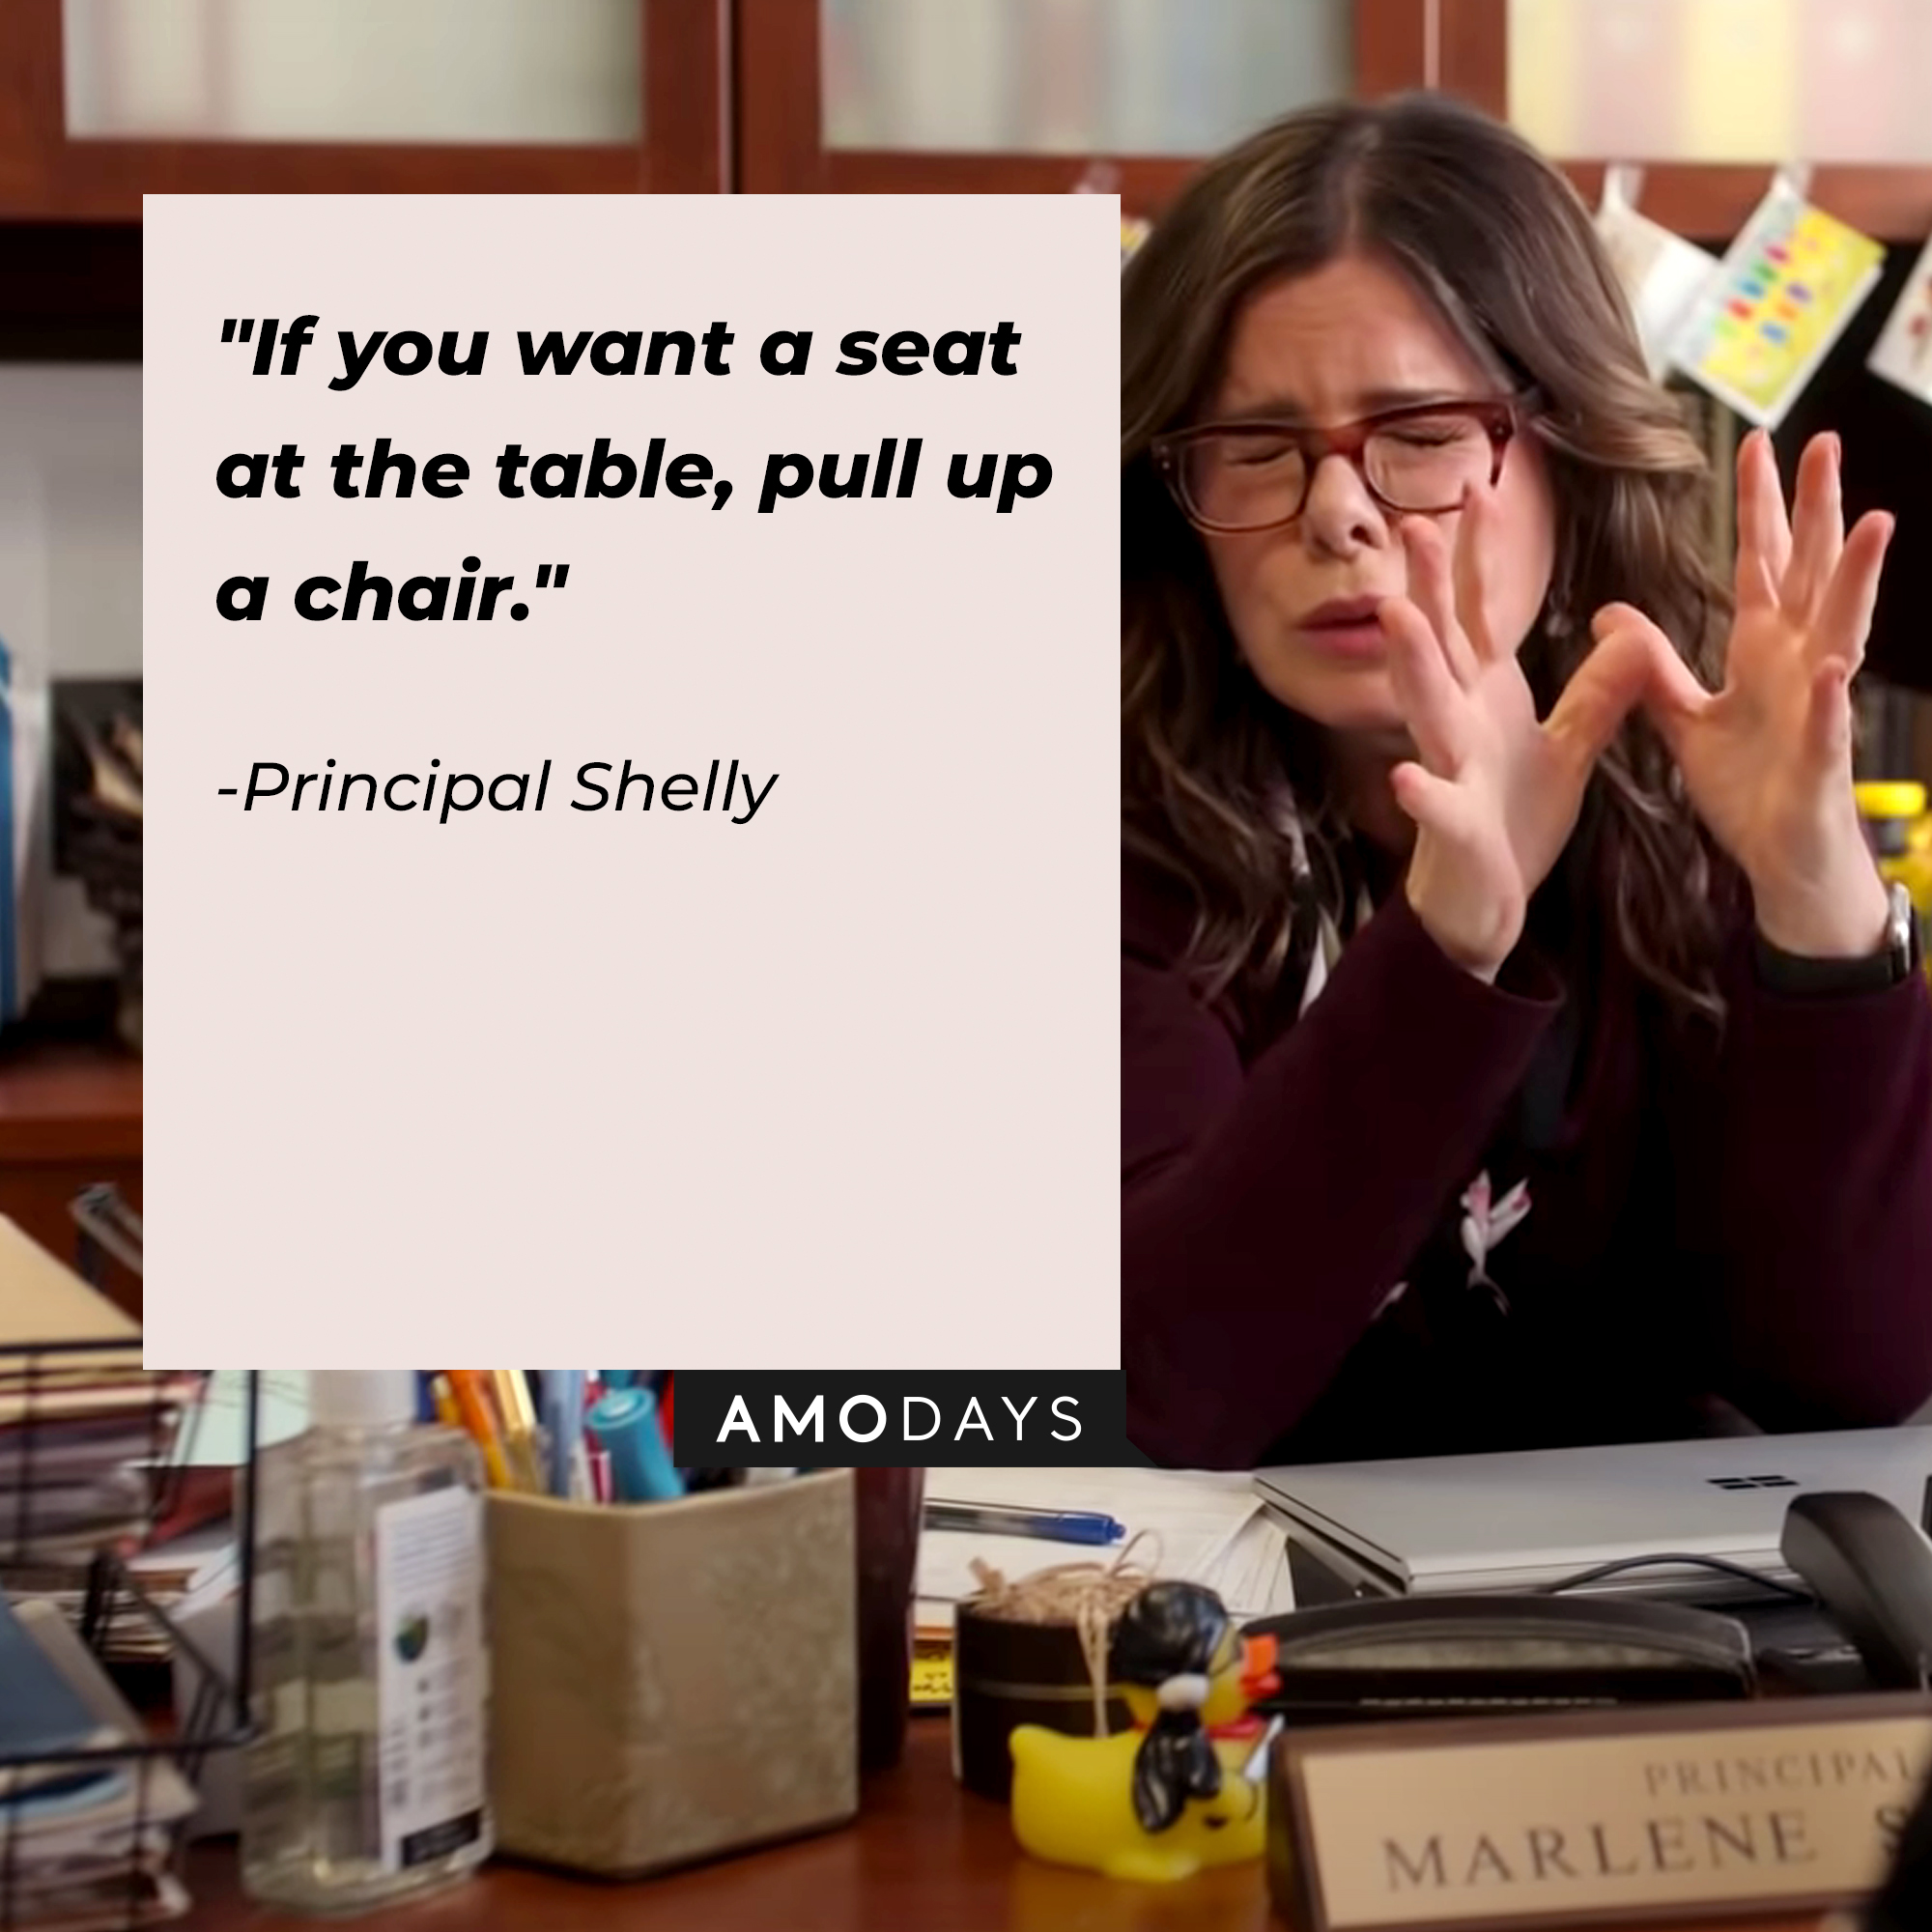 Principal Shelly’s quote: "If you want a seat at the table, pull up a chair." | Image: Youtube.com/Netflix